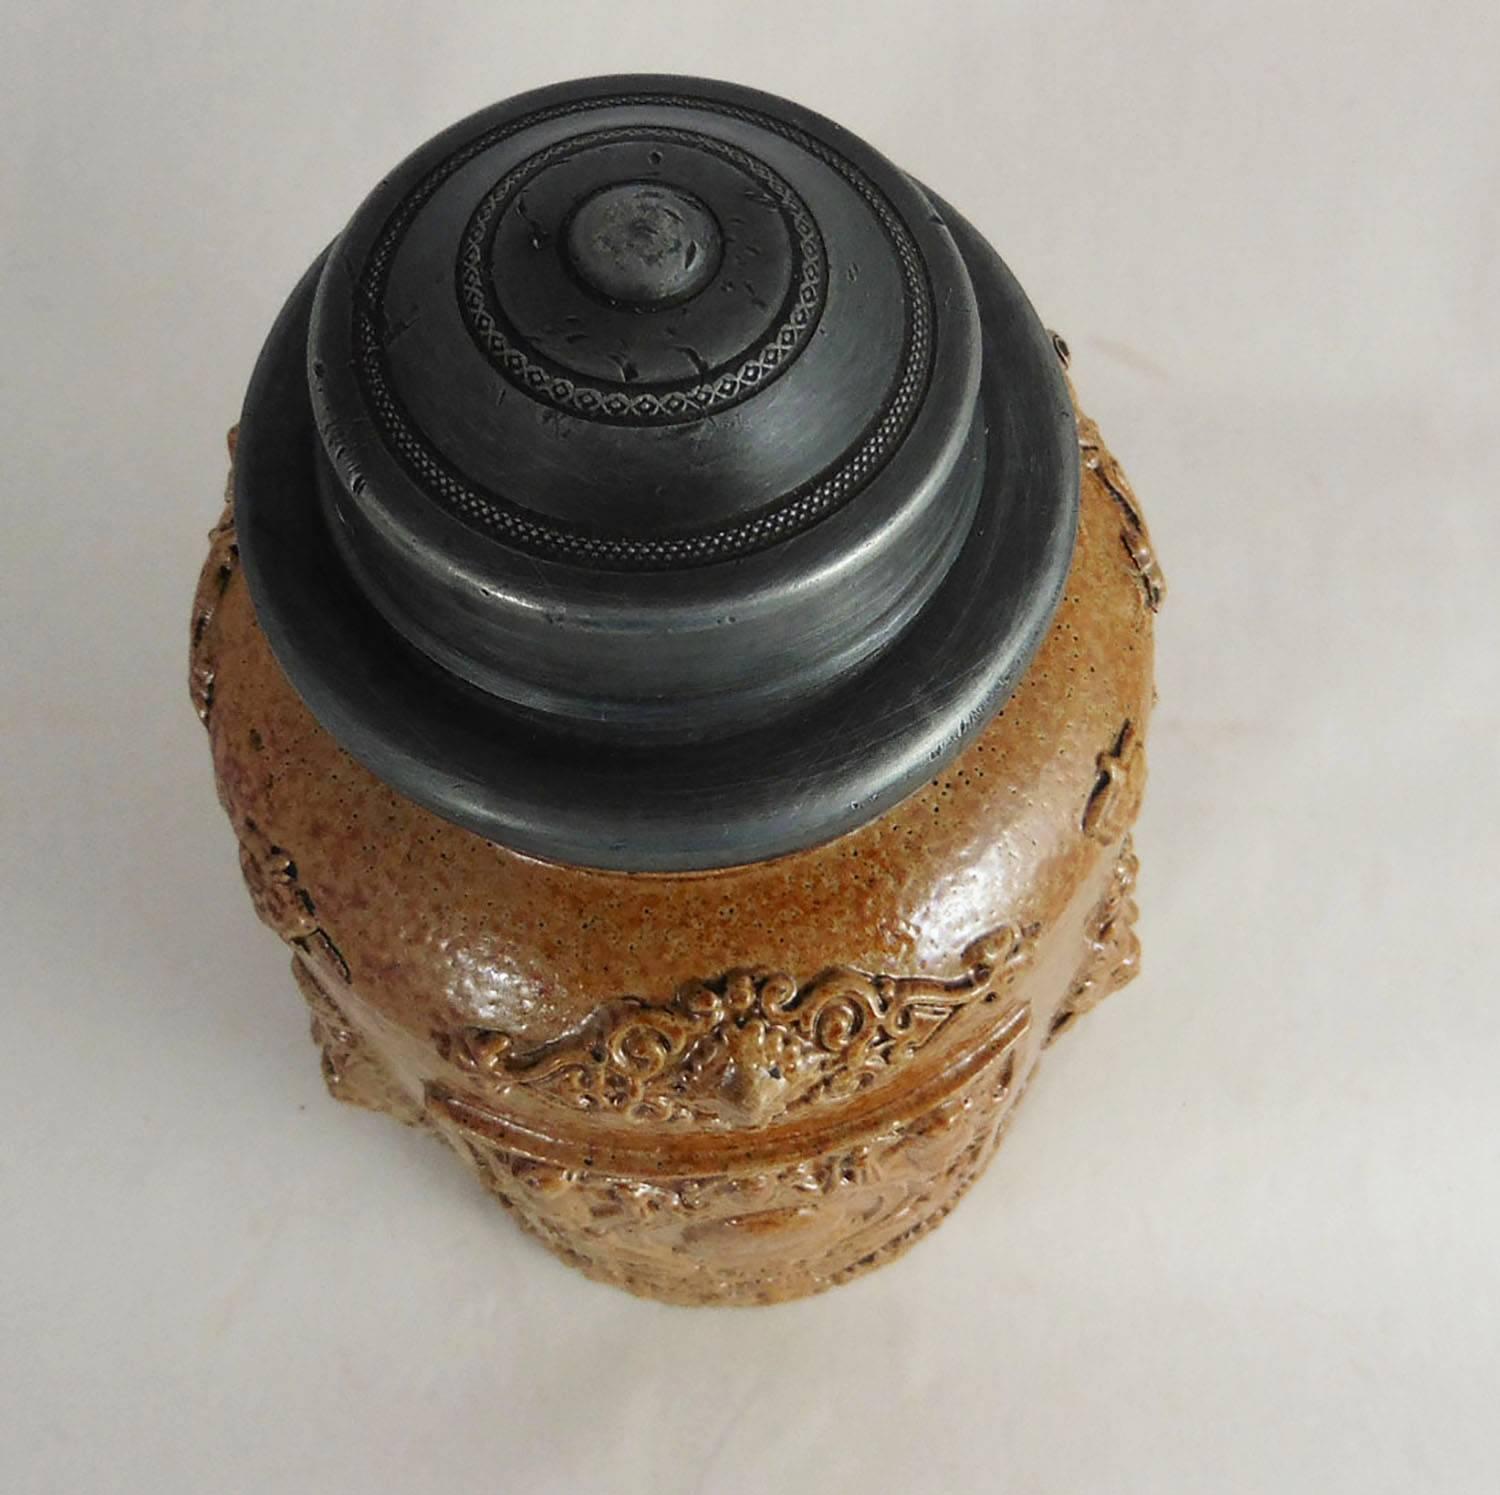 Renaissance Revival 19th Century French Pottery Tobacco Jar Humidor Renaissance Style For Sale